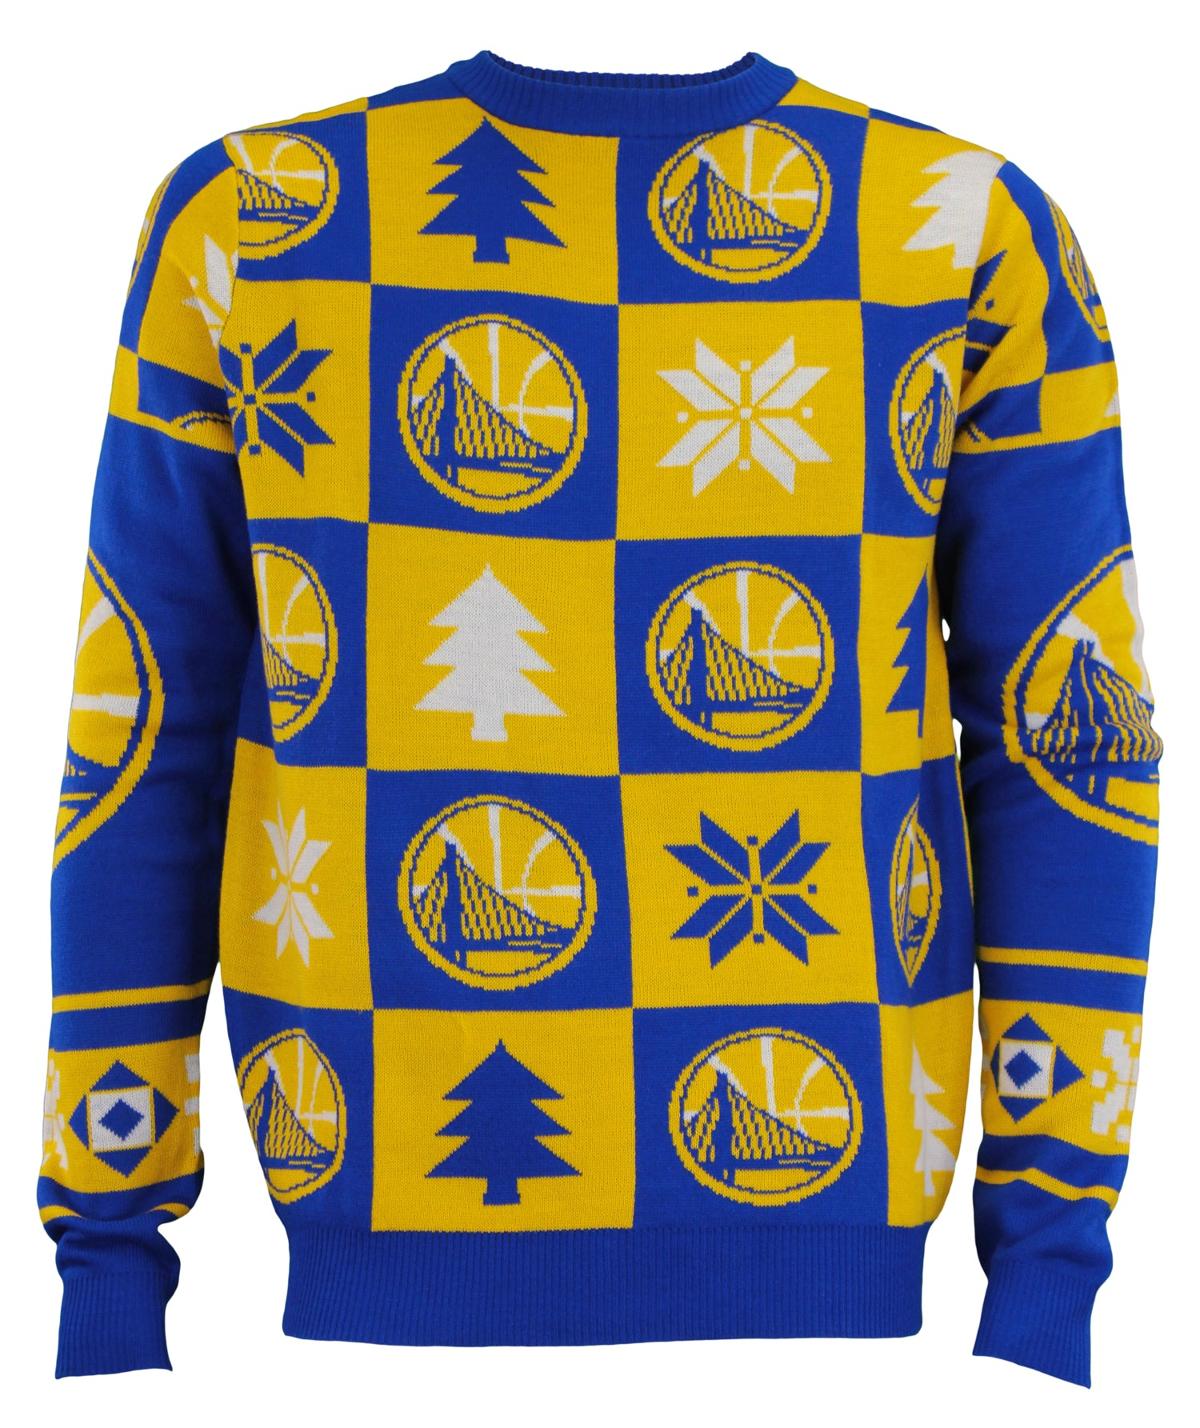 Golden State Warriors Sweater For Men And Women